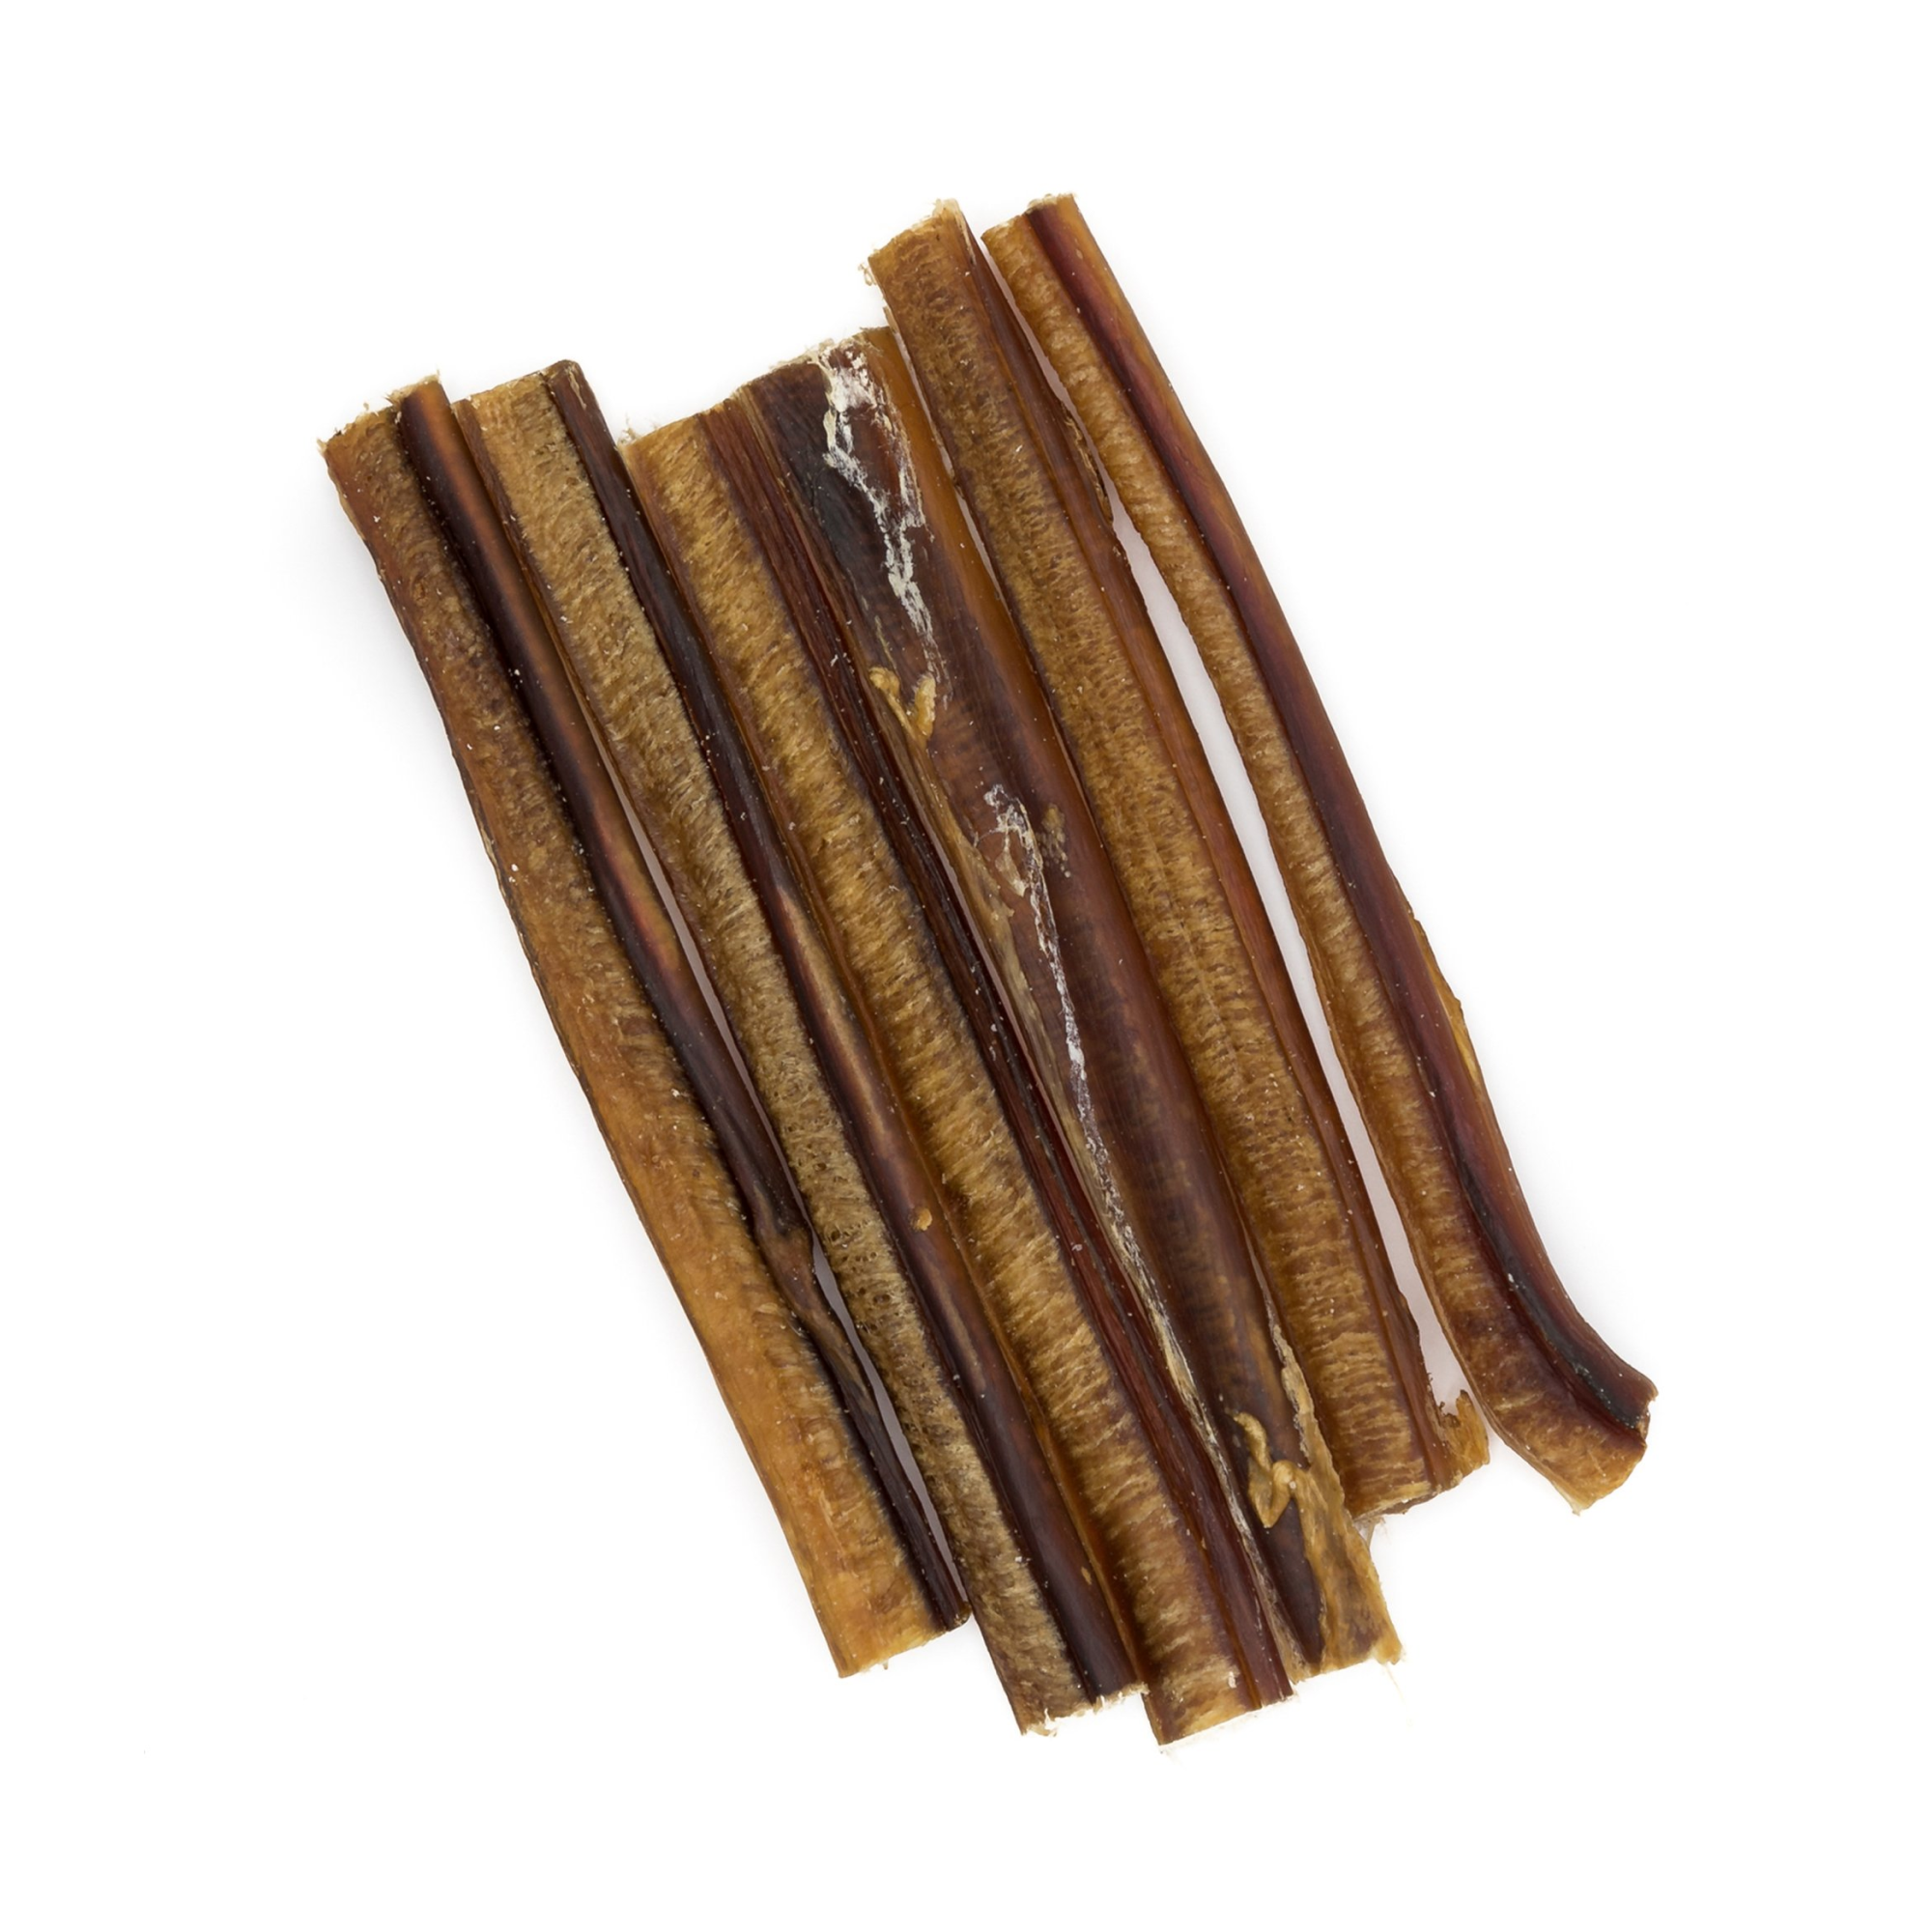 A dog in a tent was chewing on a Best Bully Sticks 6-Inch Standard Odor-Free Bully Stick.